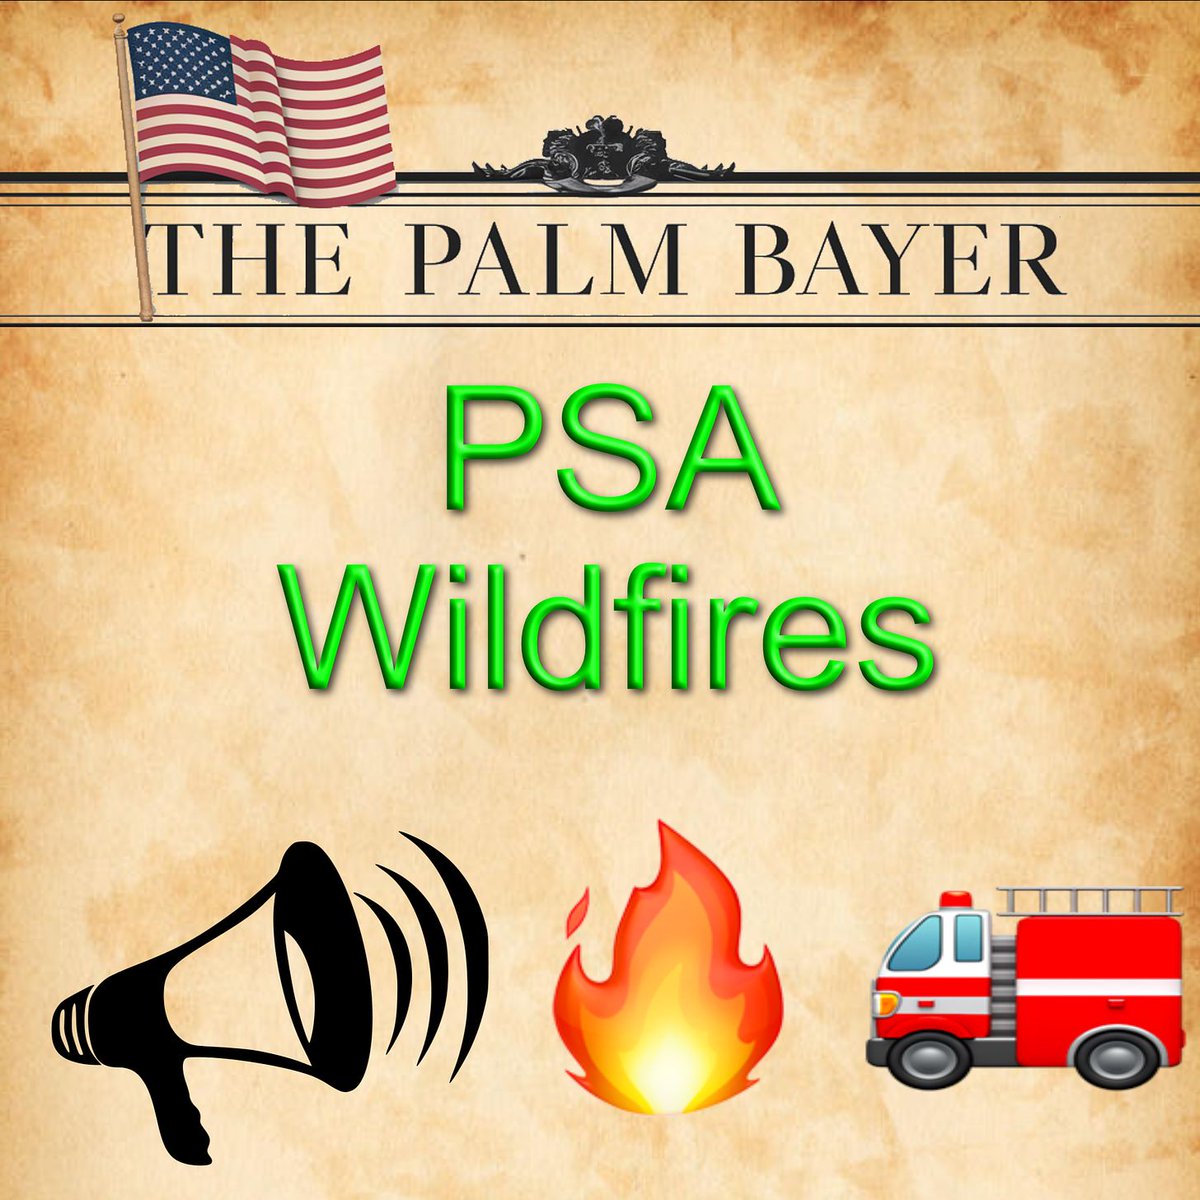 🔥 #PalmBay is on high alert for wildfires due to dry conditions. Learn how to protect your home and community. Stay informed and safe! 🔗 buff.ly/3JHZ3c4 #WildfirePreparedness #StaySafe